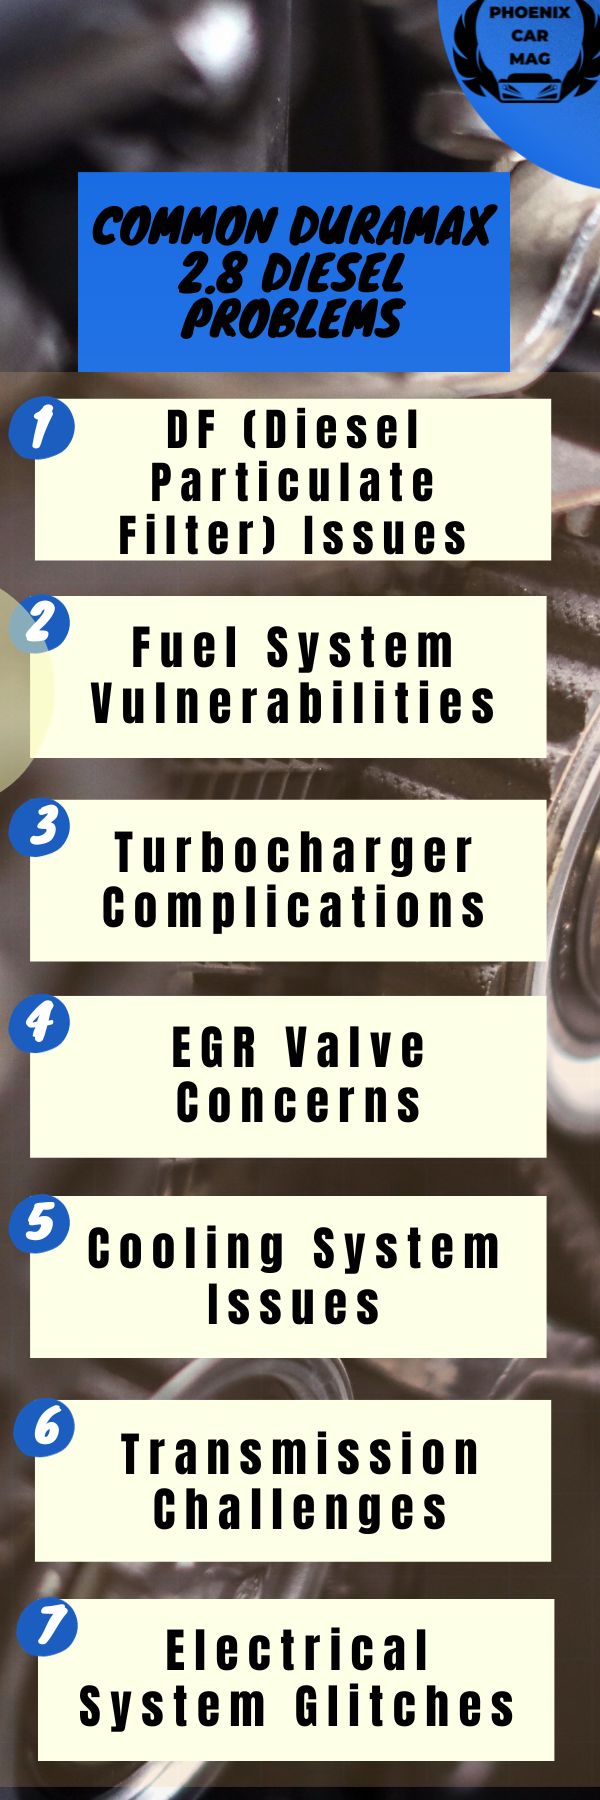 INFOGRAPHIC ABOUY  Common Duramax 2.8 Diesel Problems